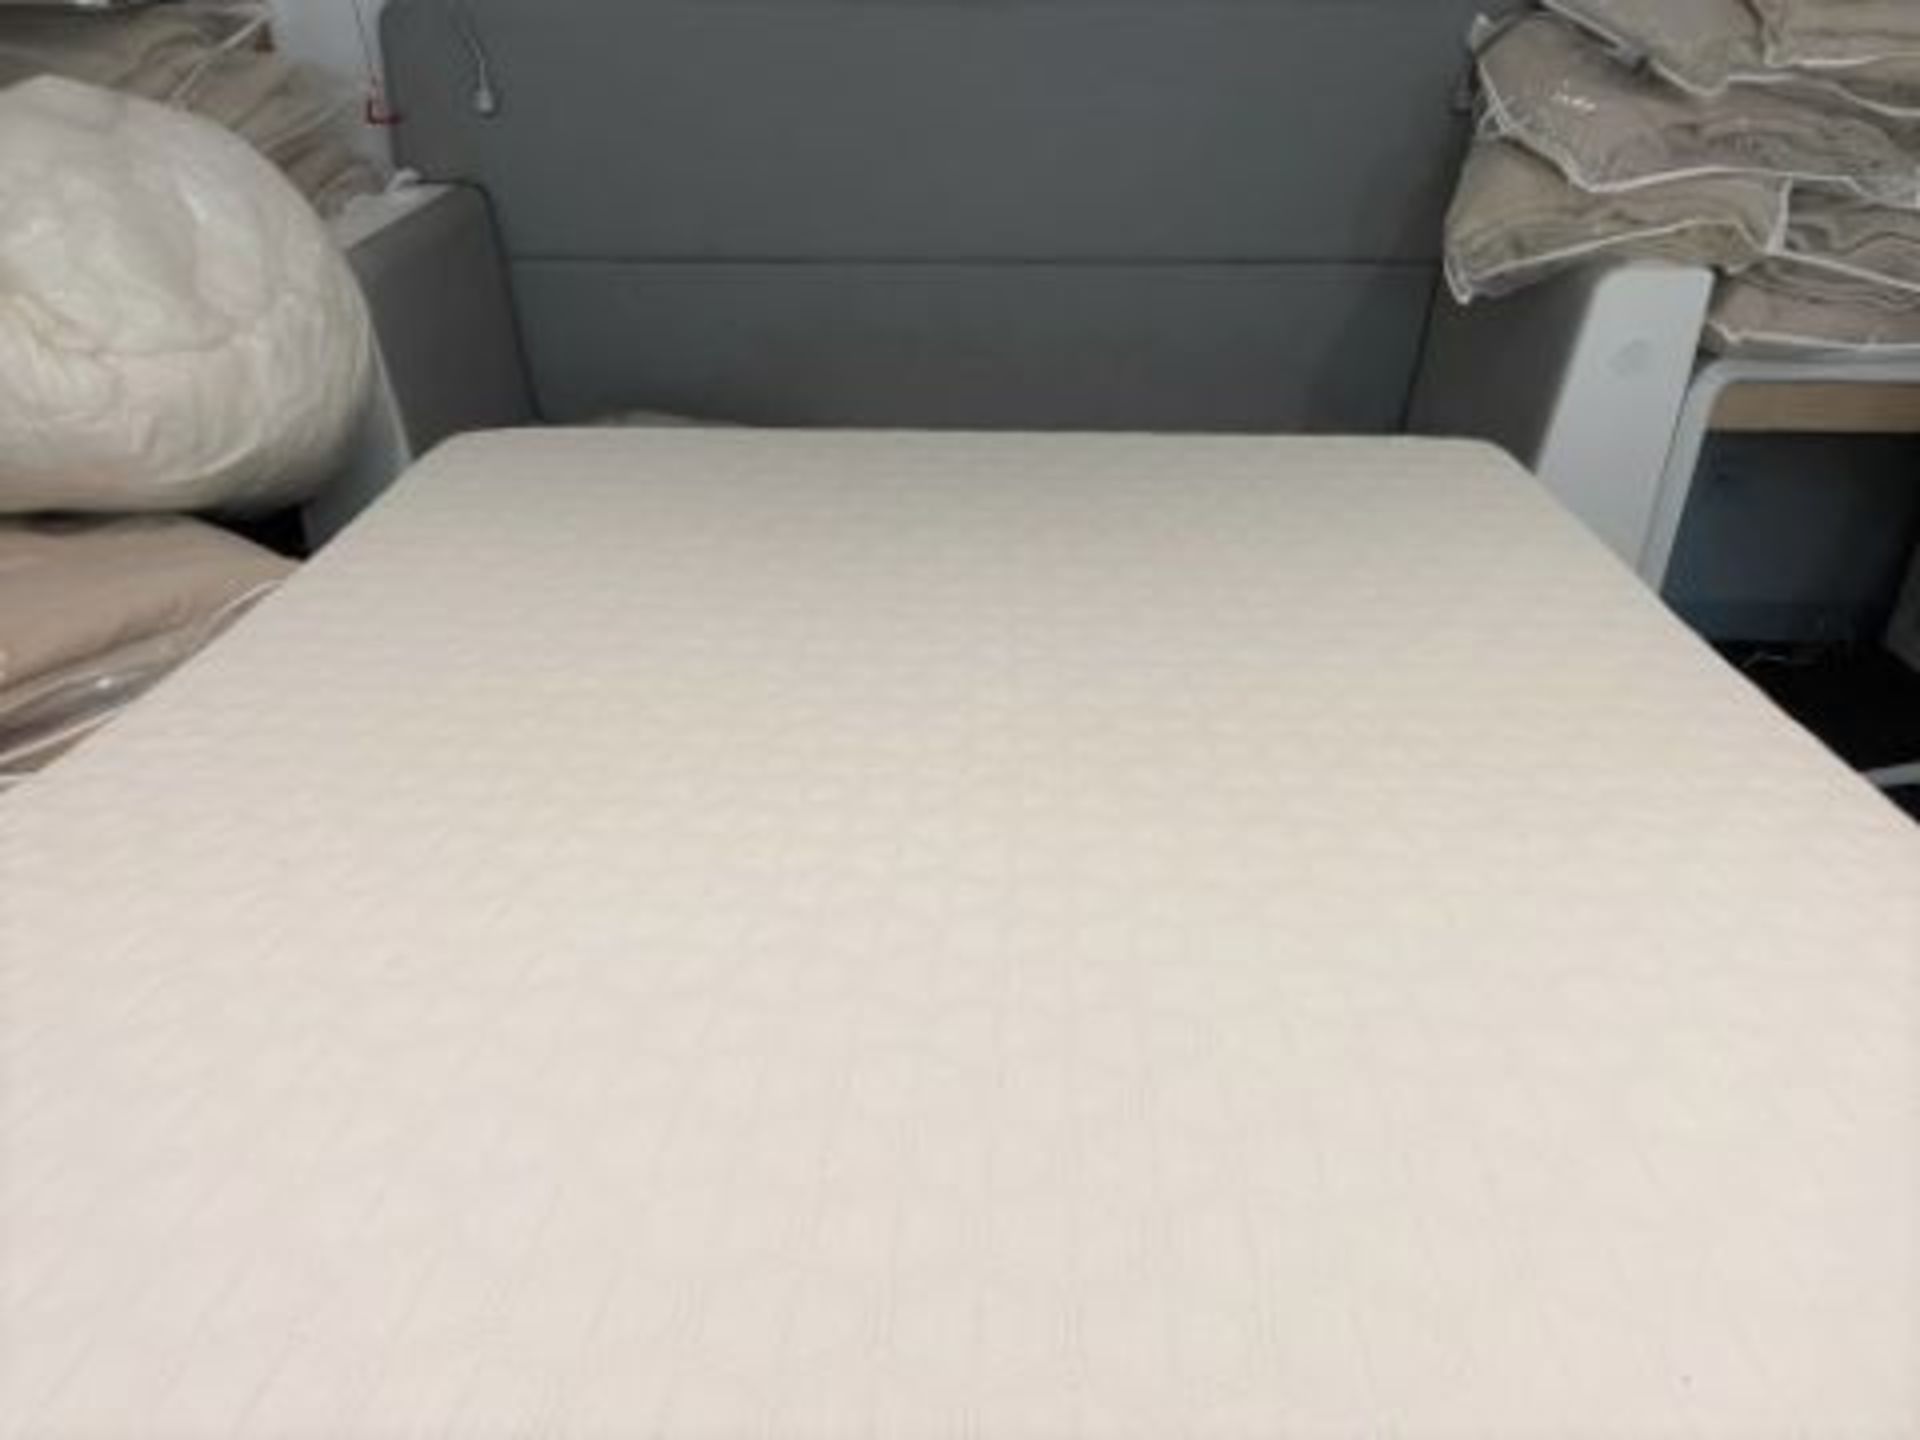 1 x Double Adjustable Space Saving Smart Bed With Serta Motion Memory Foam Mattress - Signature - Image 5 of 8